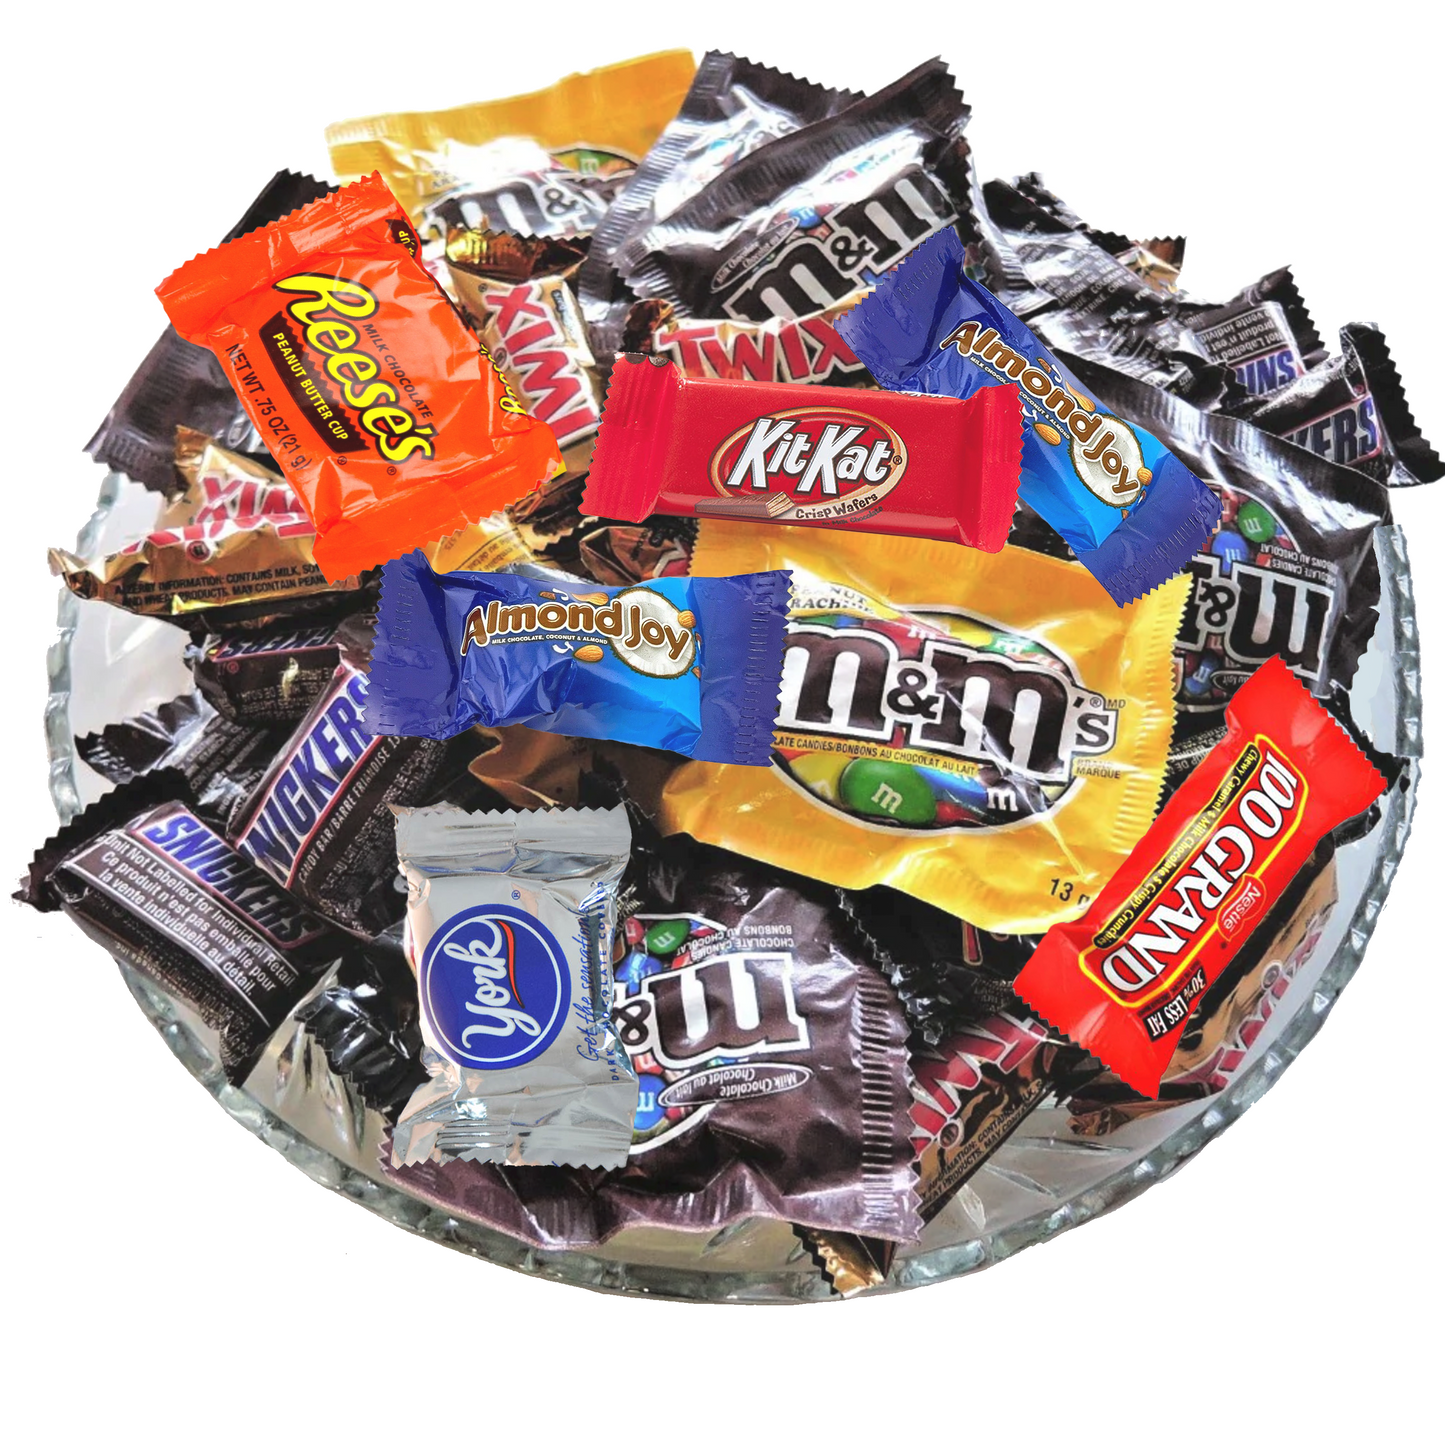 (3 LBS) Chocolate Candy Bundle with M&M'S Milk Chocolate, M&M'S Peanut, Skittles, Starburst, Snickers, Milky Way & Twix Individually Wrapped Candy